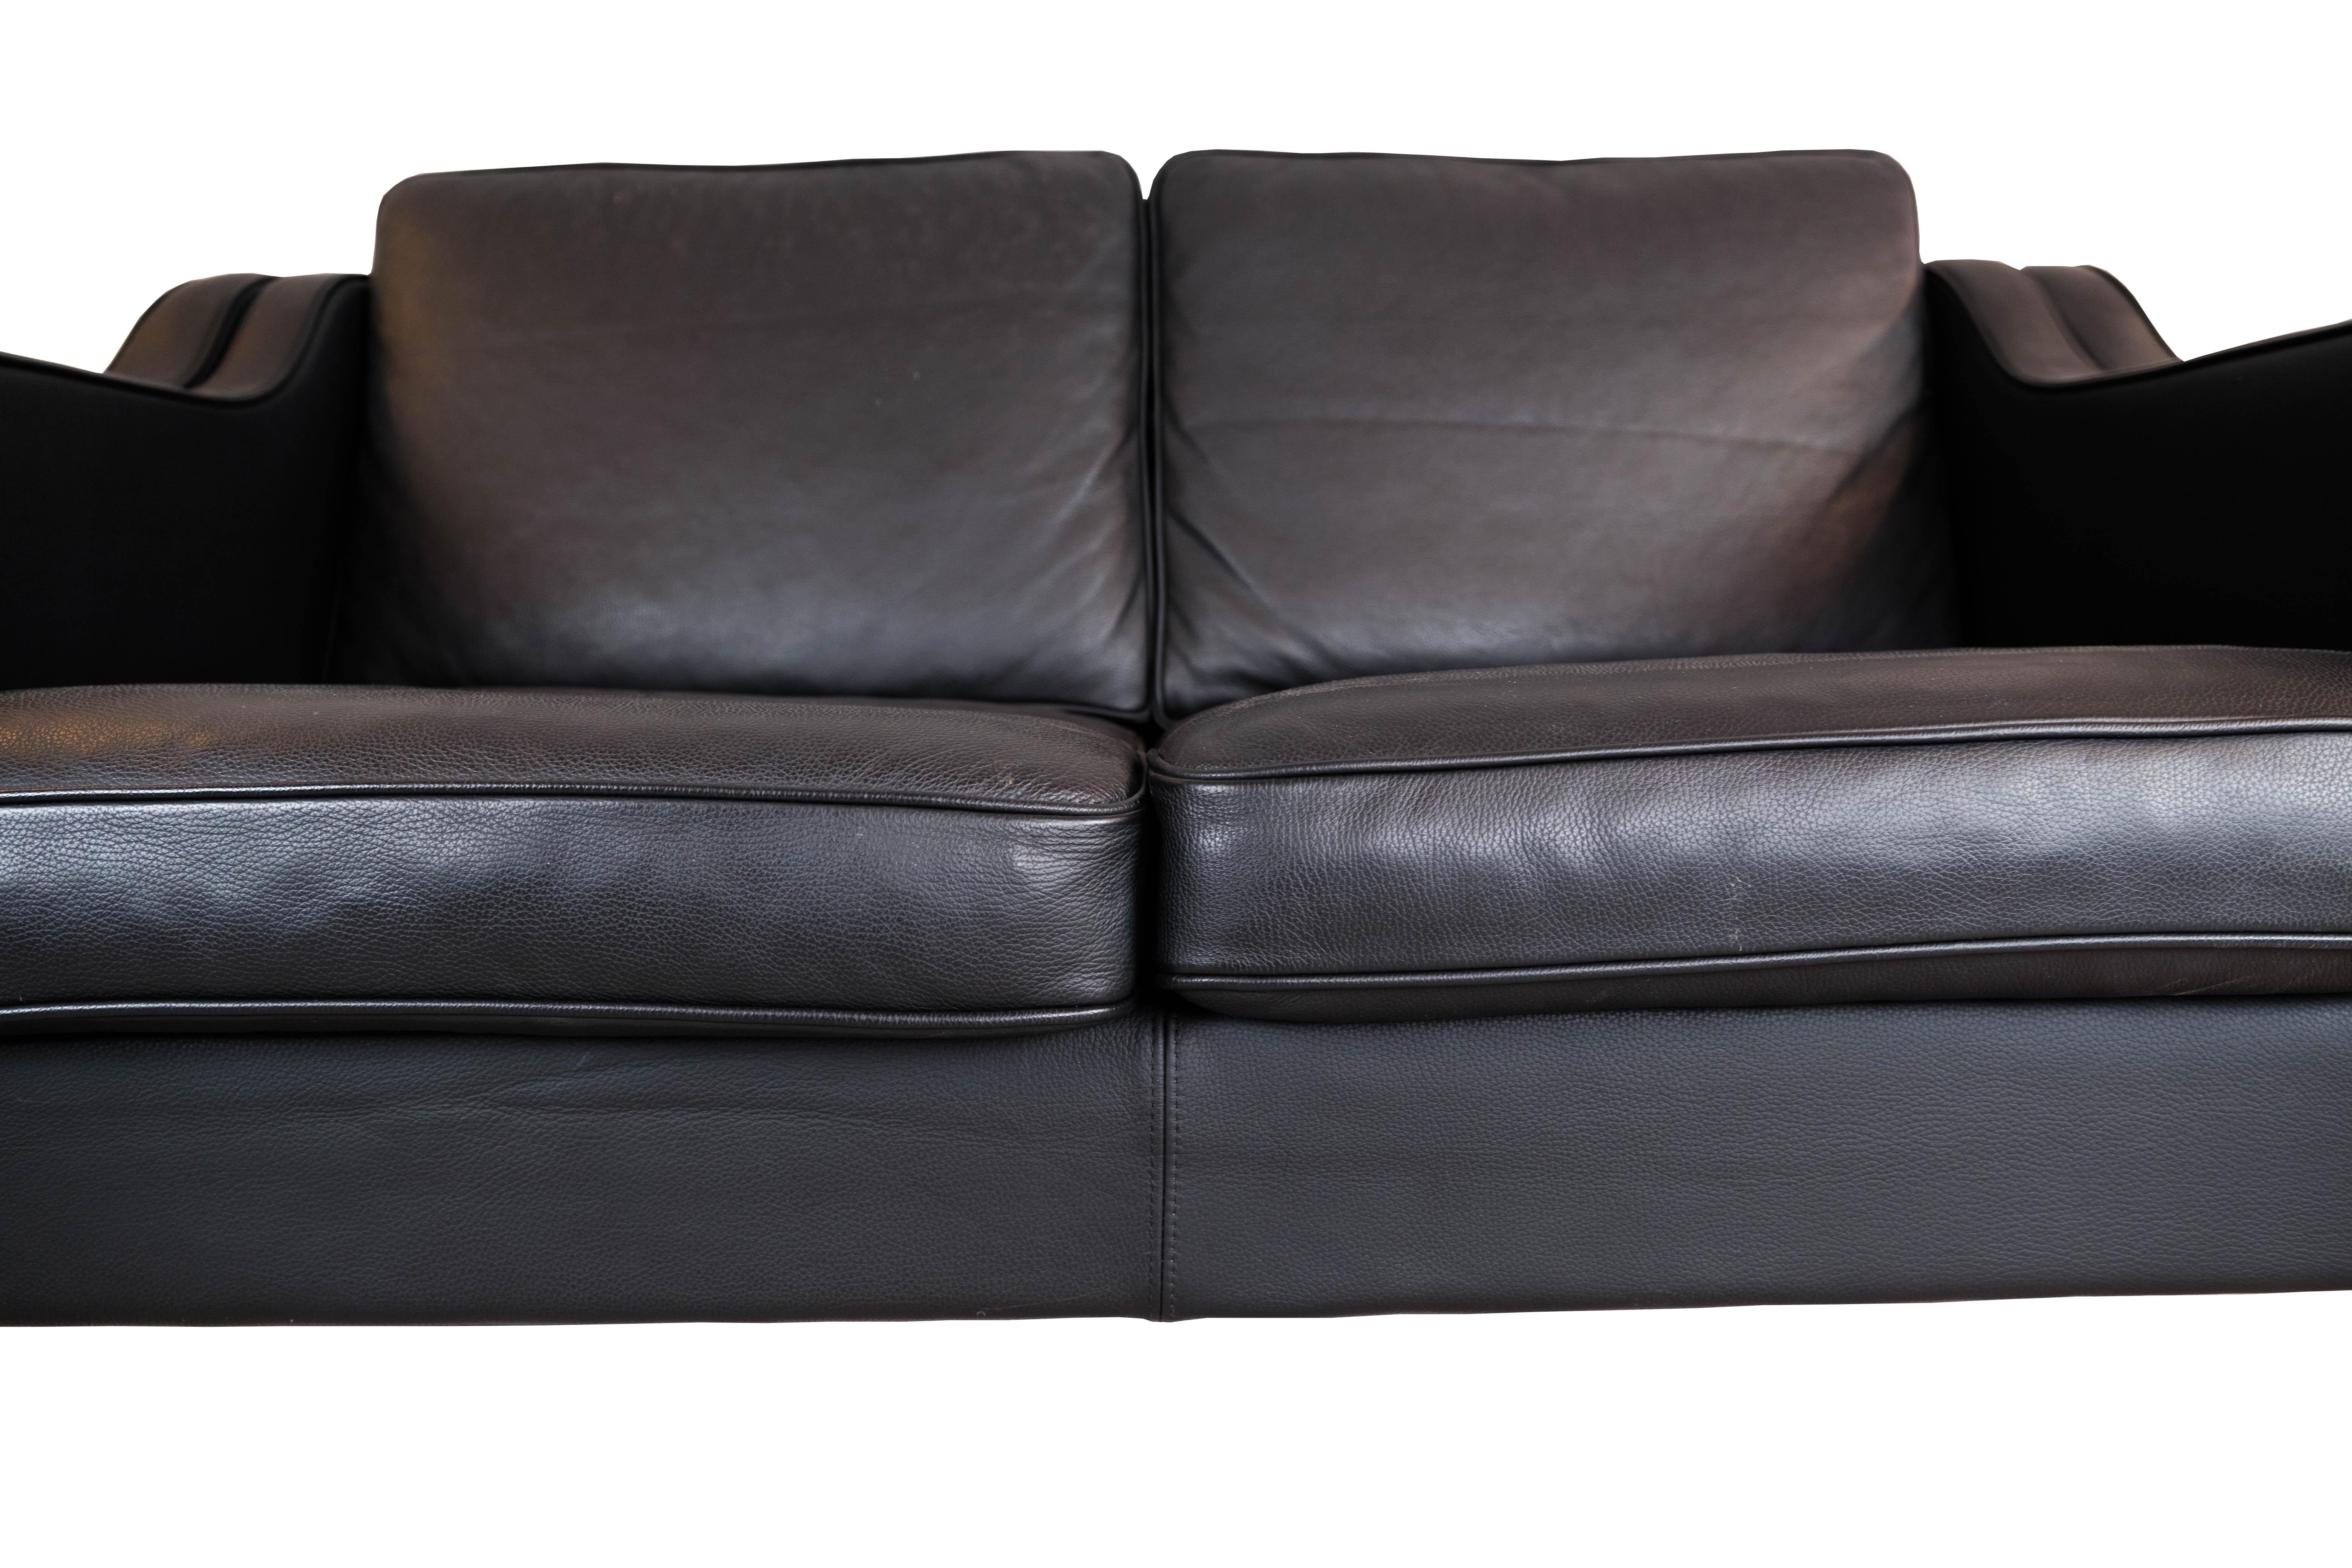 Scandinavian Modern Black Leather 2 Seater Sofa with Legs of Oak, Manufactured by Stouby Furniture